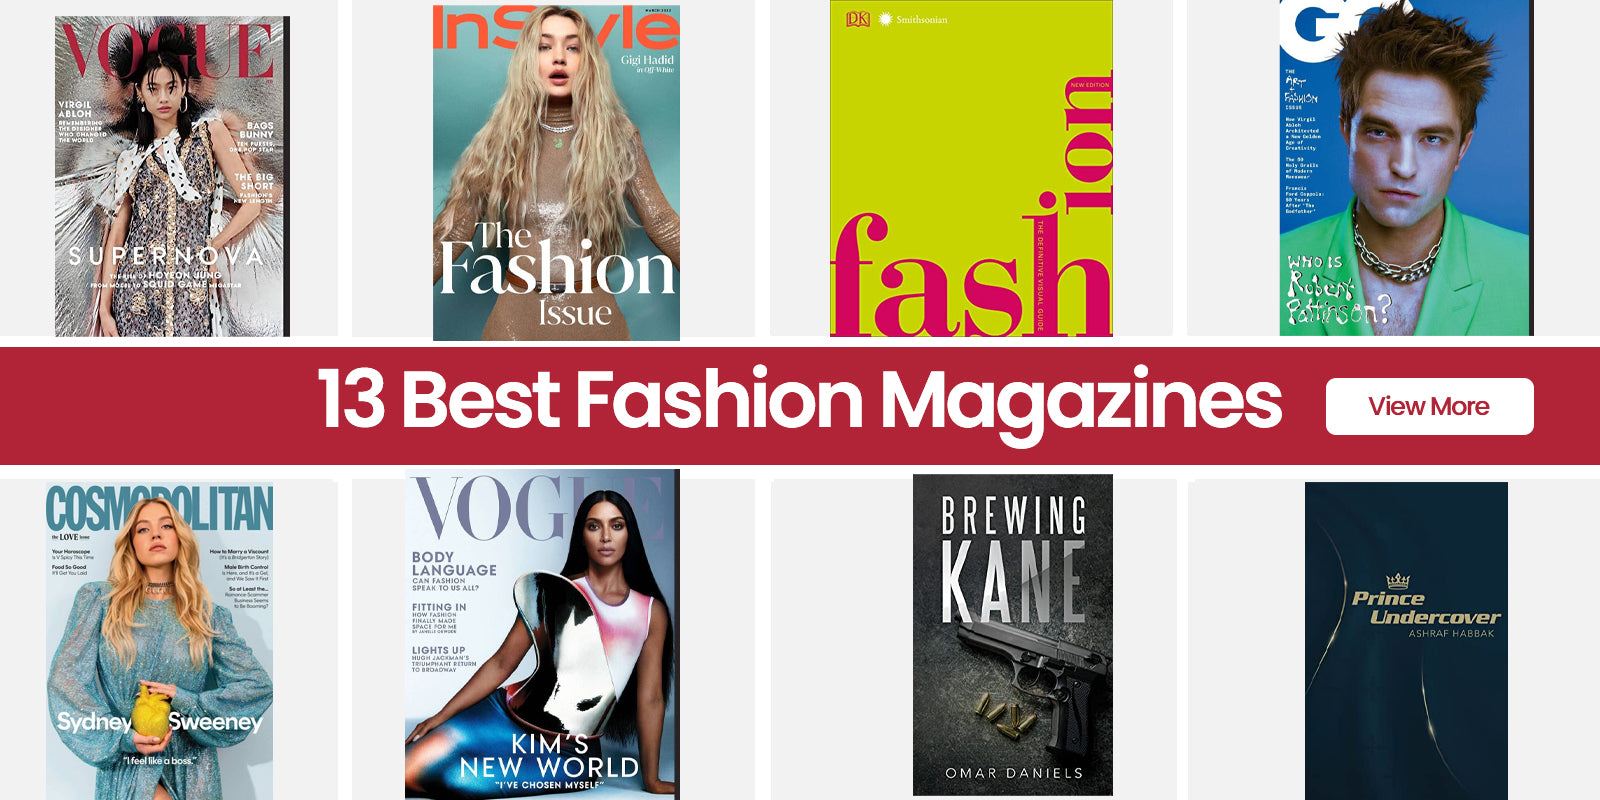 Fashion Marketing: News, Trends & More, Vogue Business, Page 3